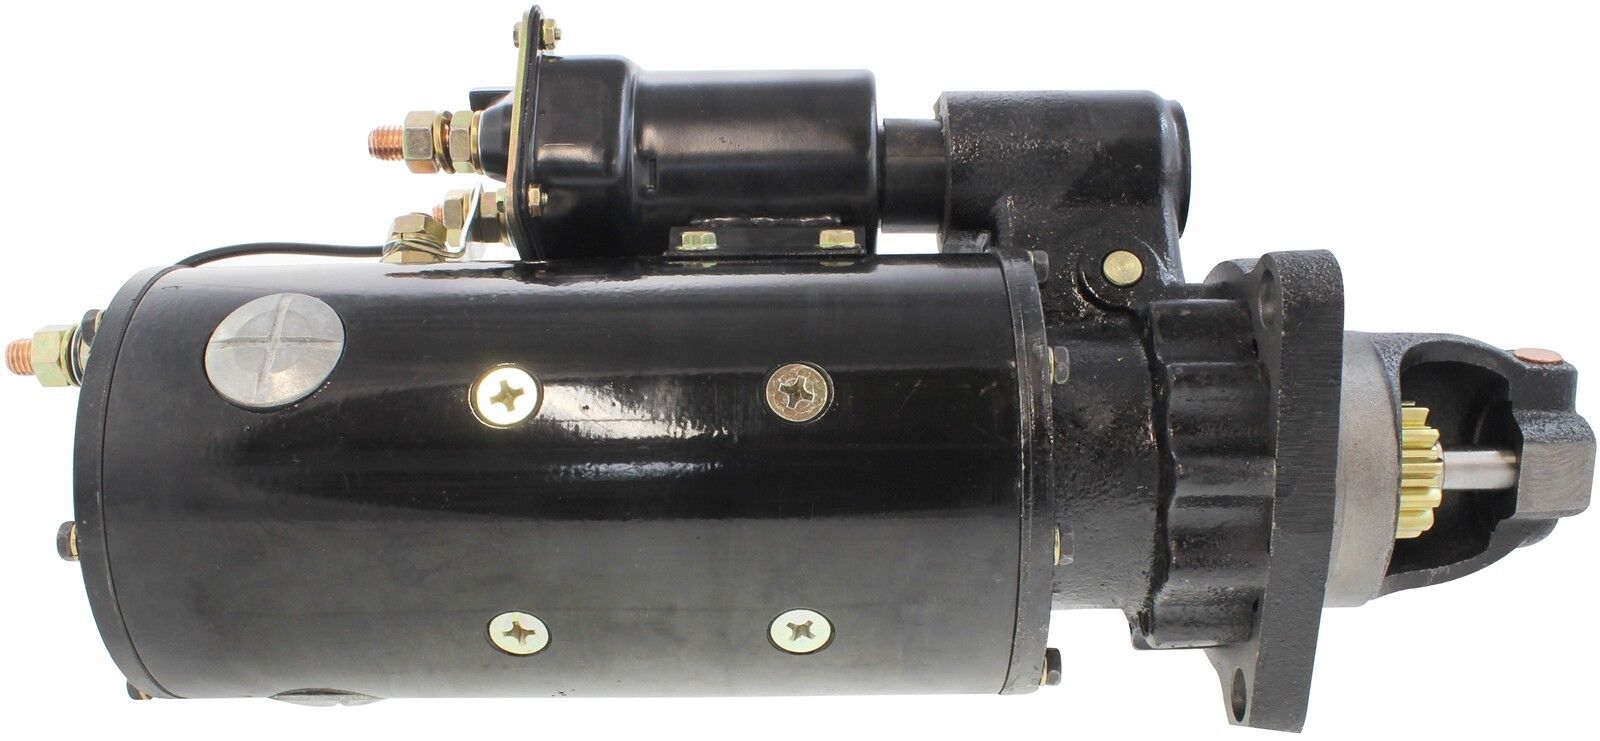 New 24V 12T Starter fits Caterpillar 3306 3406 replaces 4N3180 4N3313 7T4957